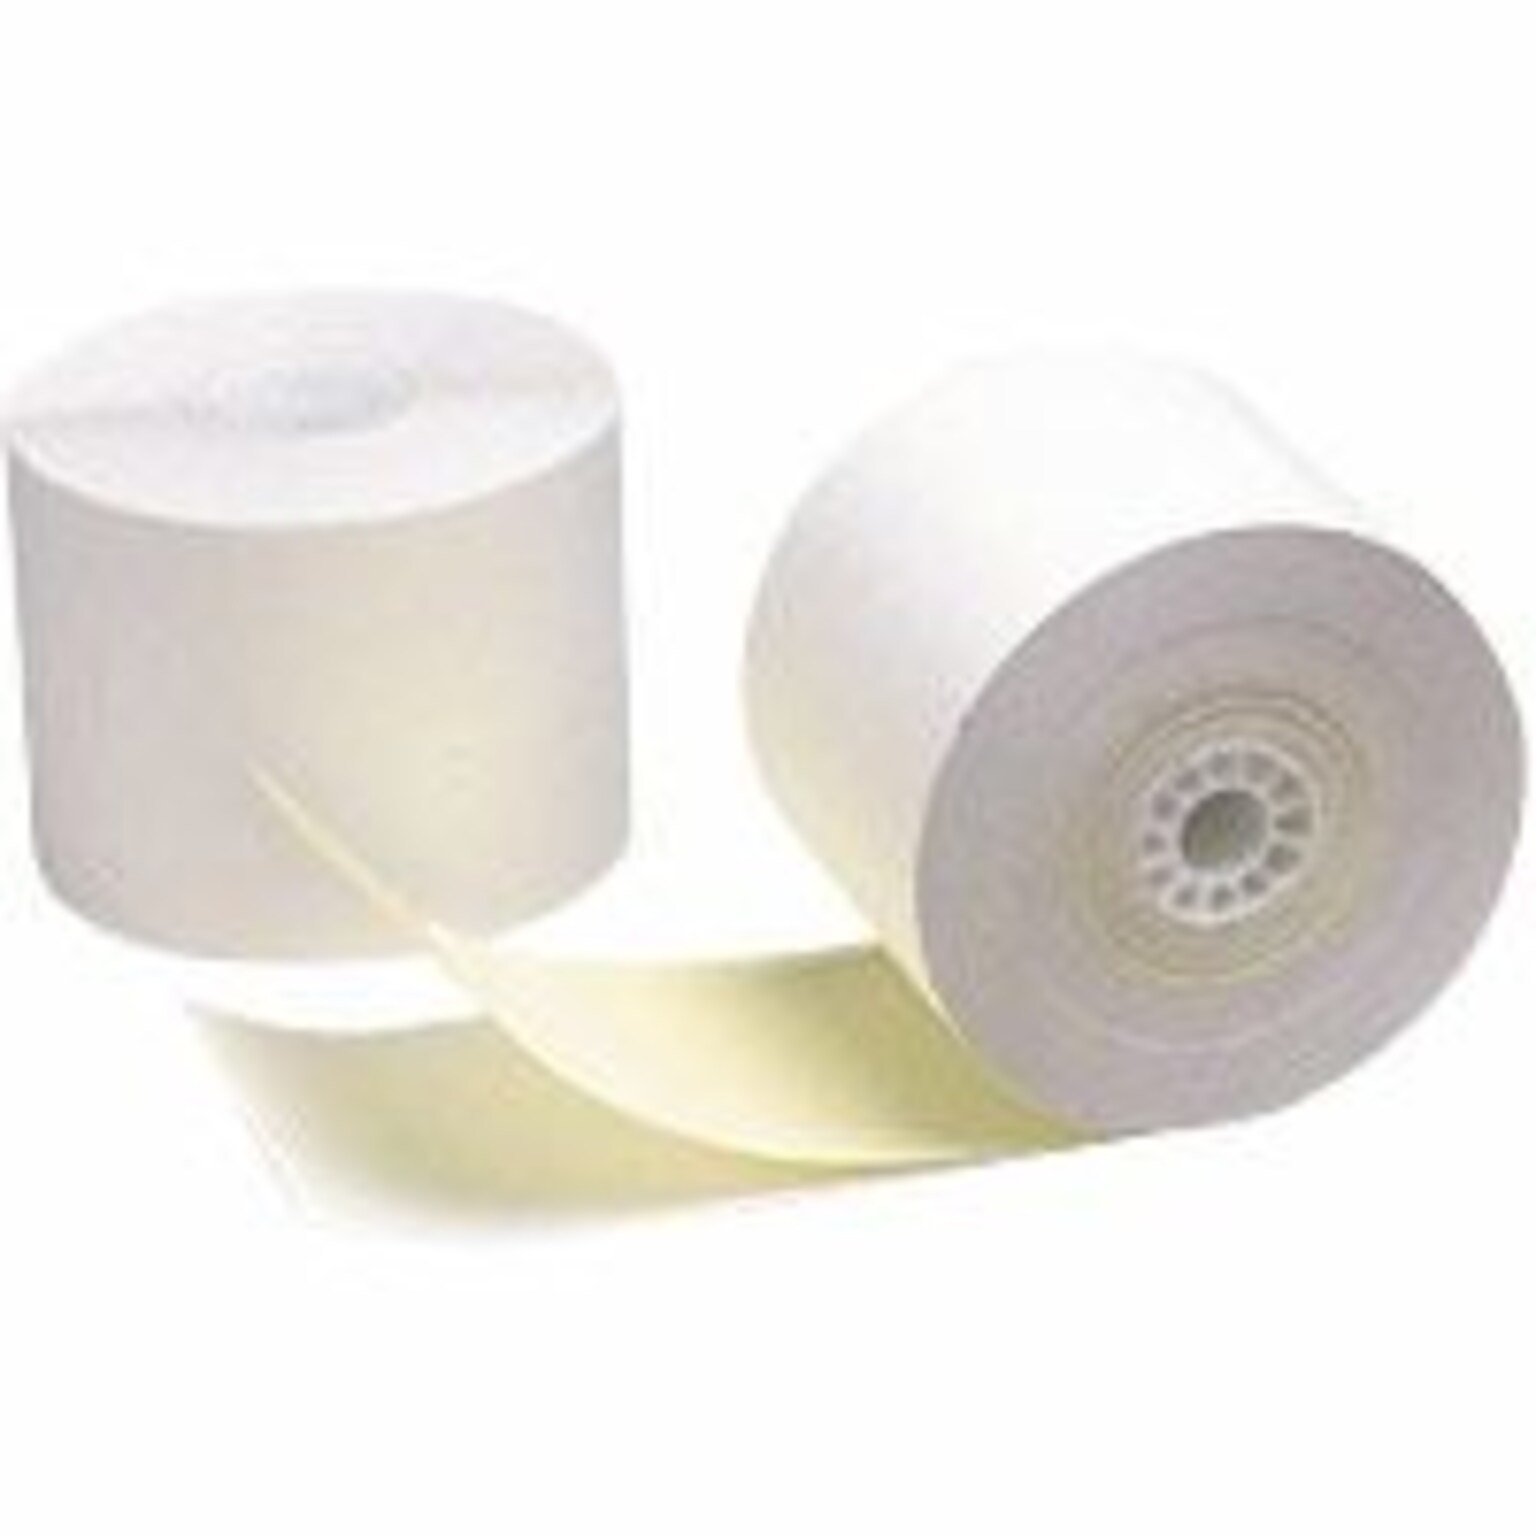 NCR Adding Machine Paper Roll, 2-Ply, 2 1/4 x 100, 1 Roll (795419)